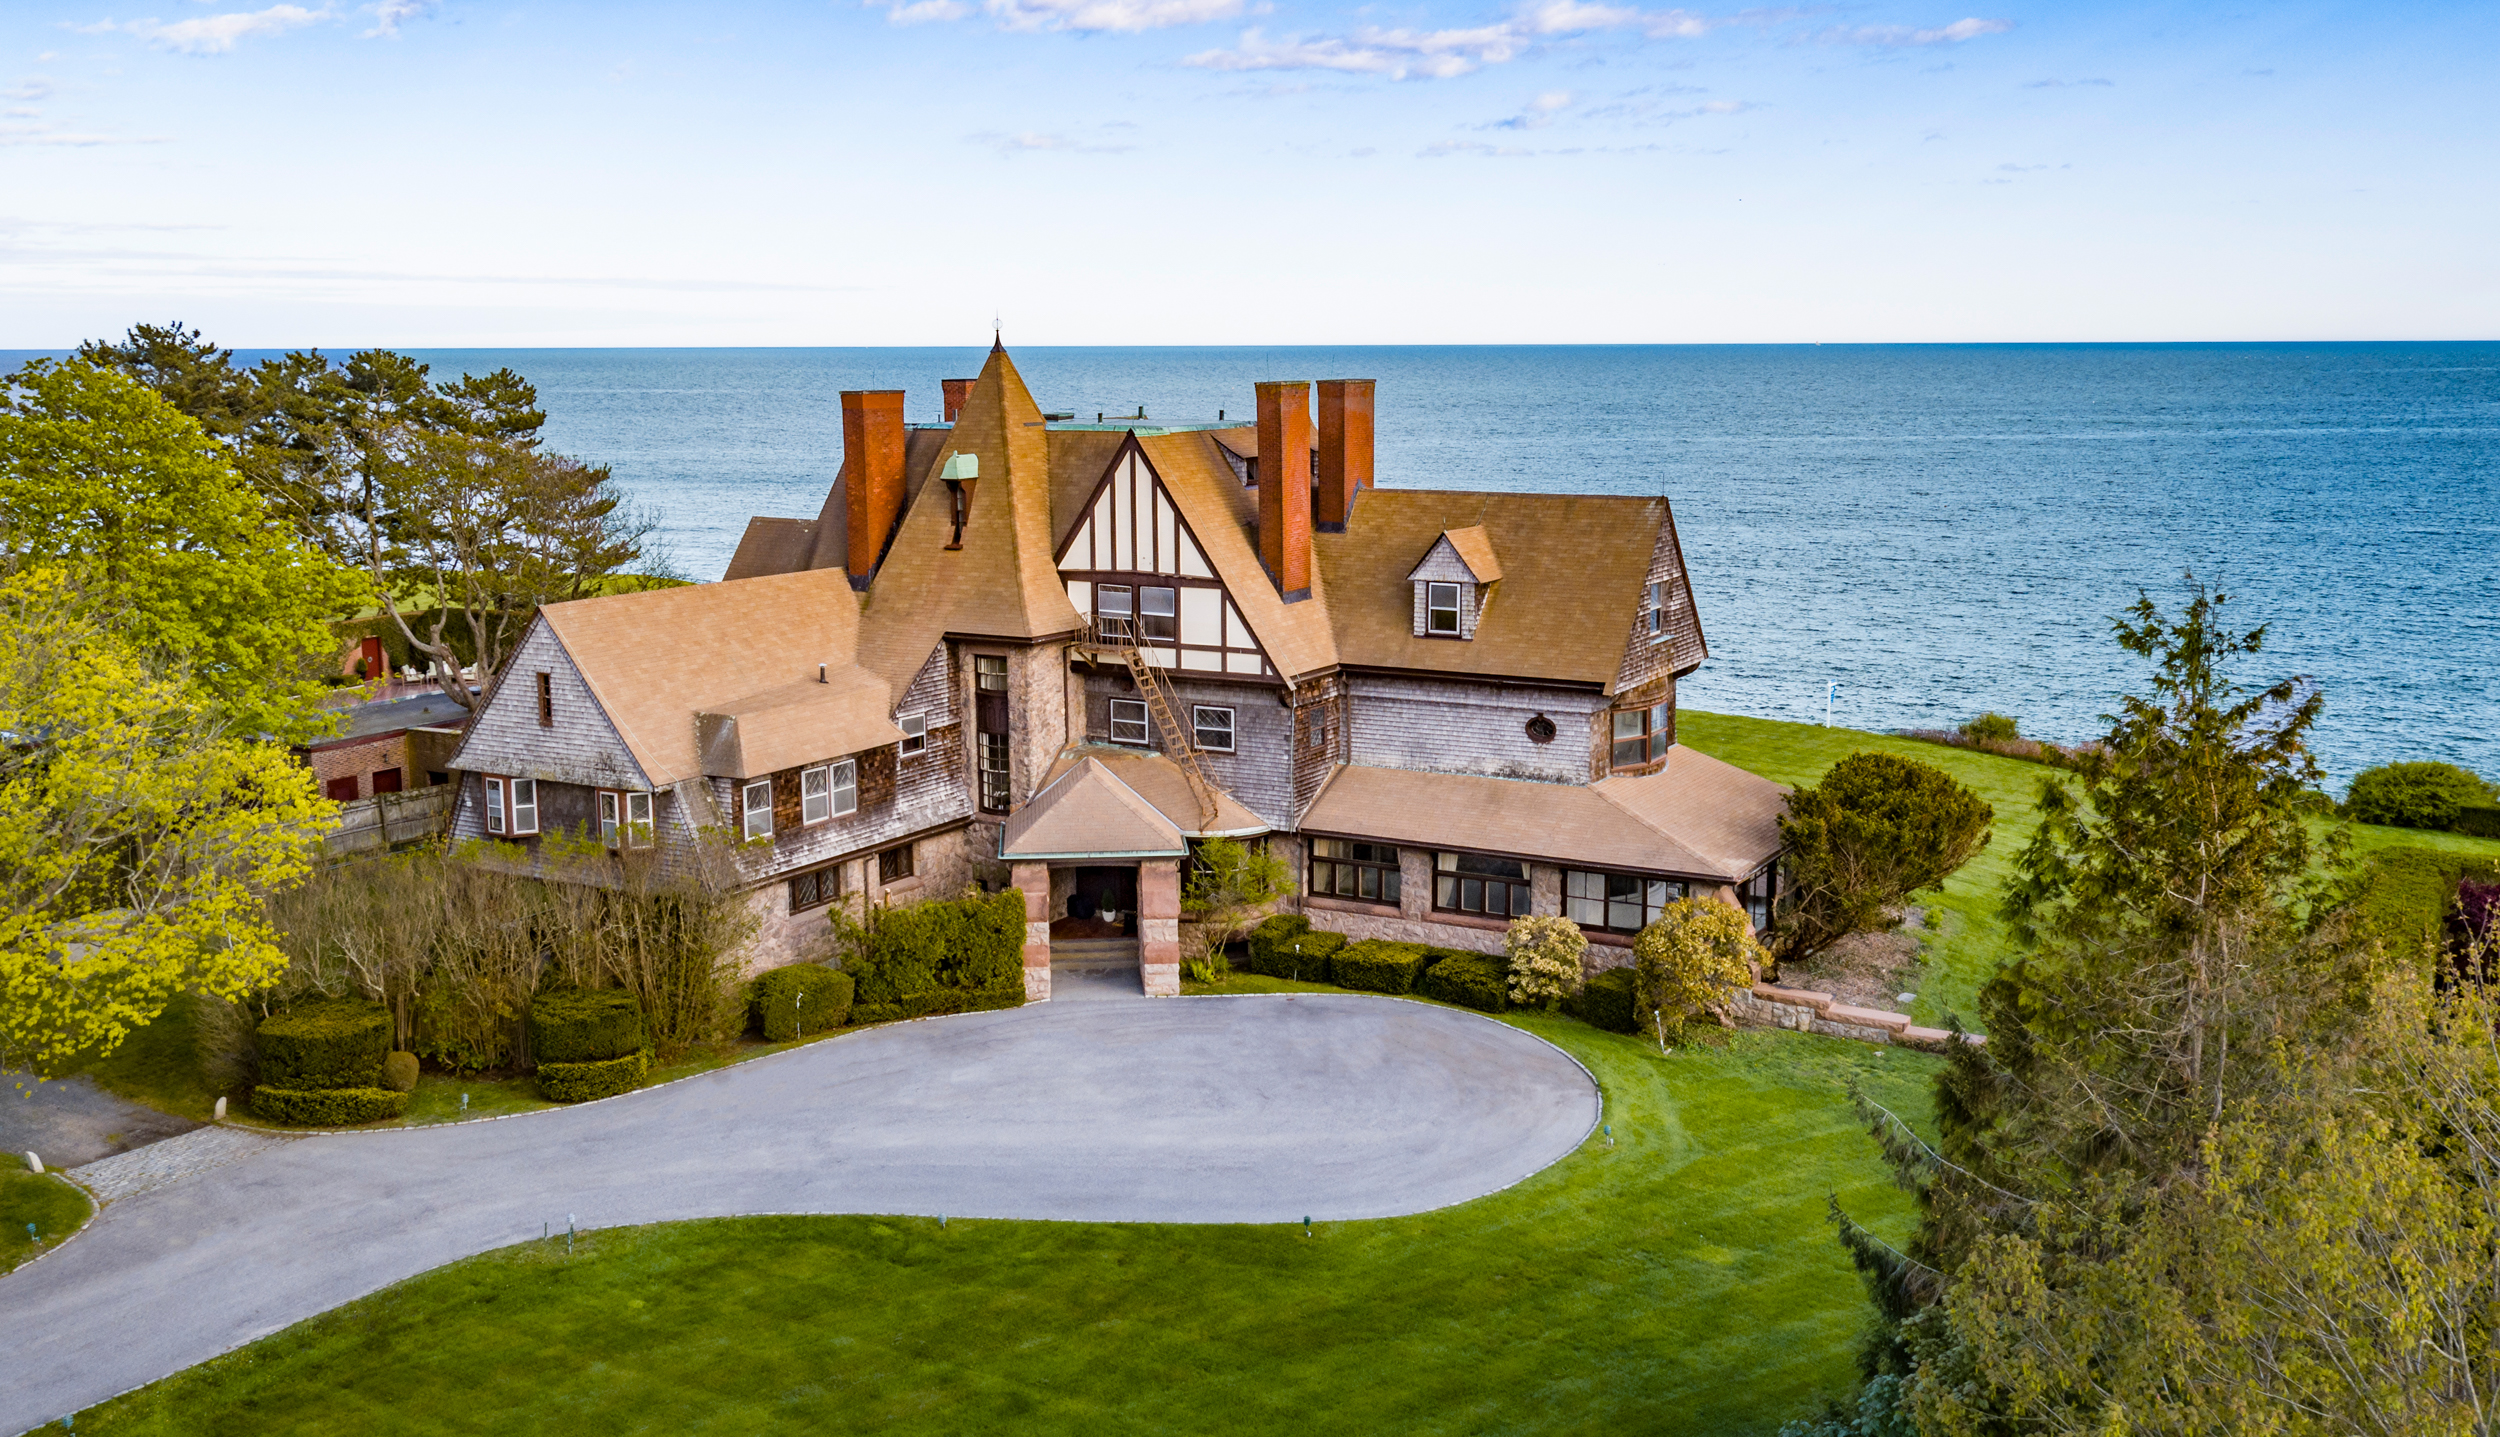 ‘Midcliff’ Sold, Represents Second Highest Sale in Newport This Year